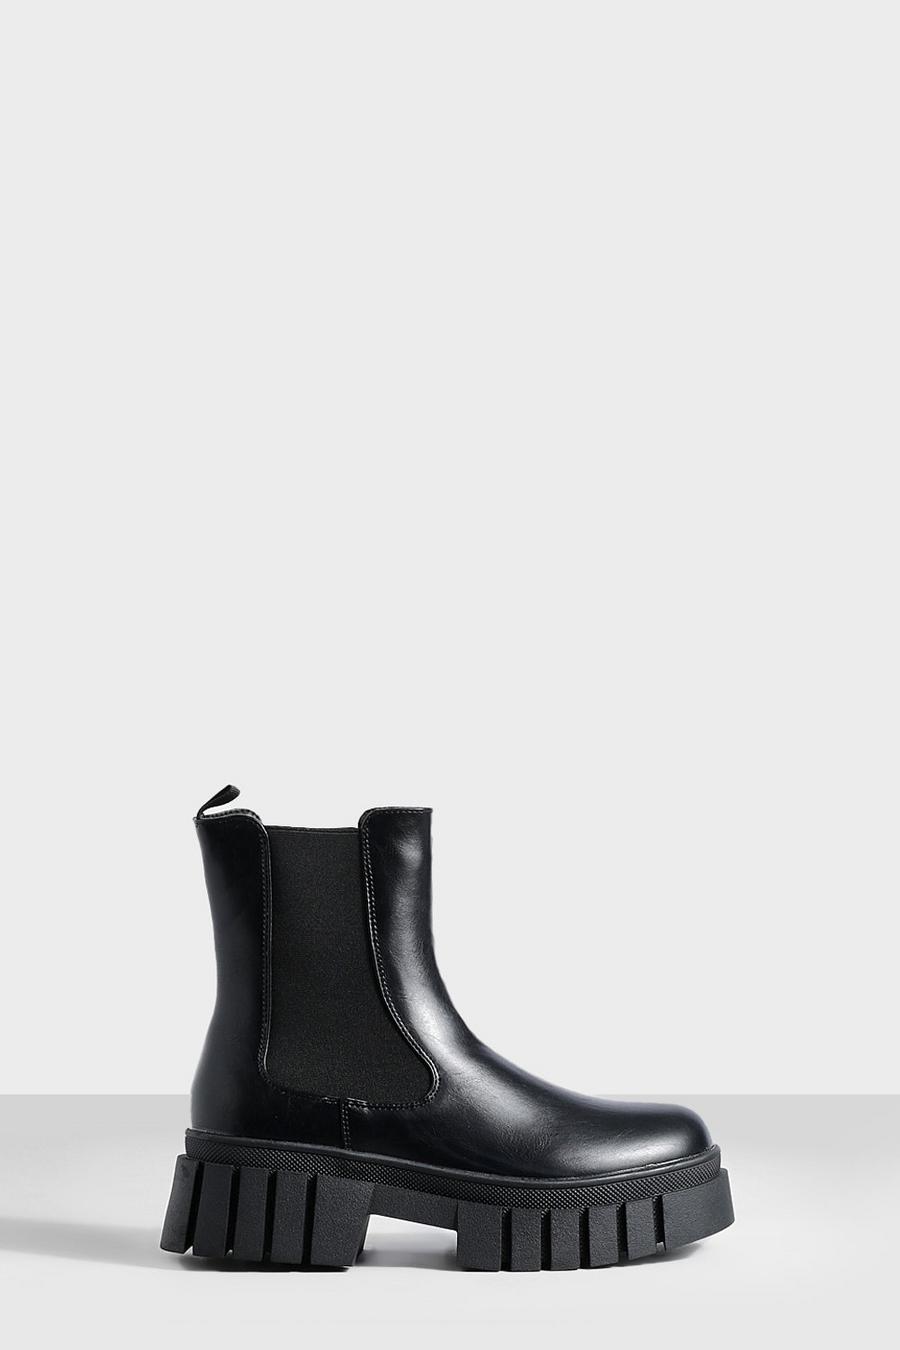 Black noir Chunky Cleated Sole Chelsea Boots